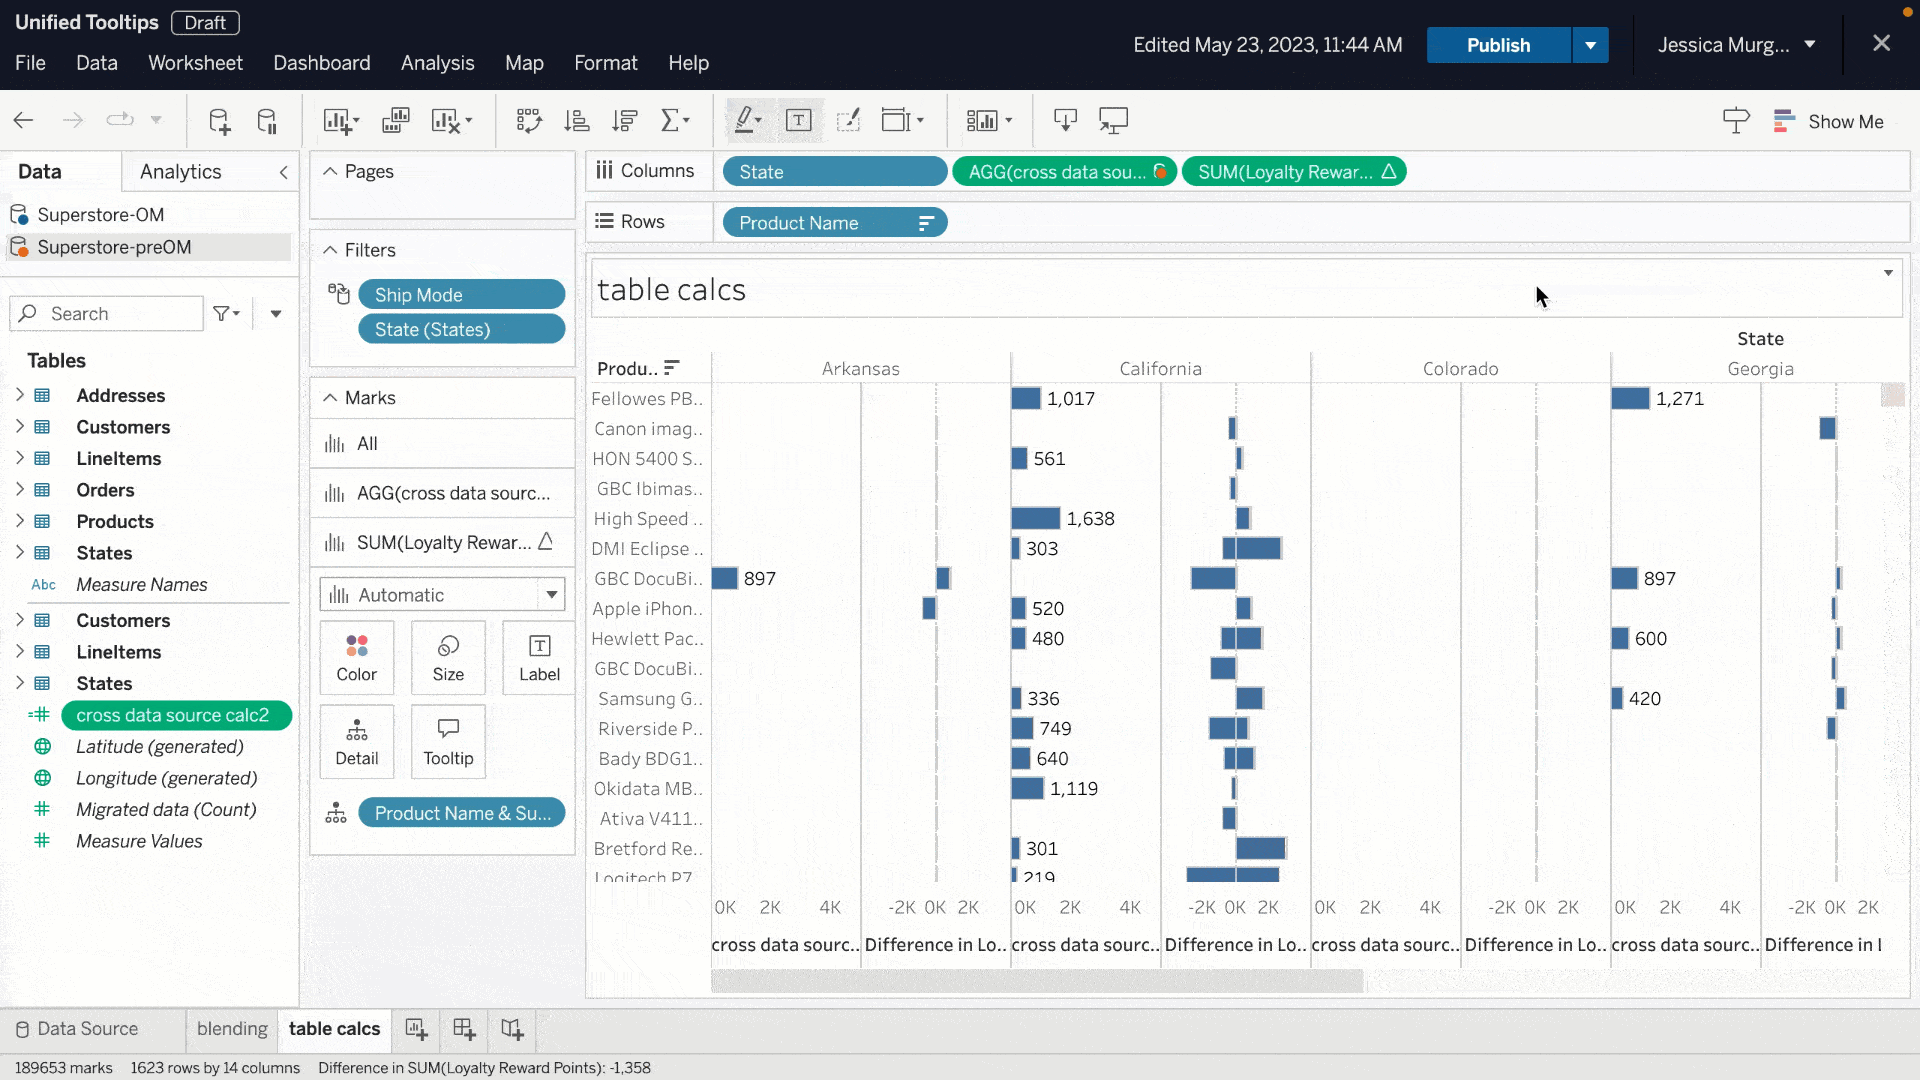 Video of a Tableau visualization showing pop-up windows with useful, consolidated information with table calculation details, field comments, and more